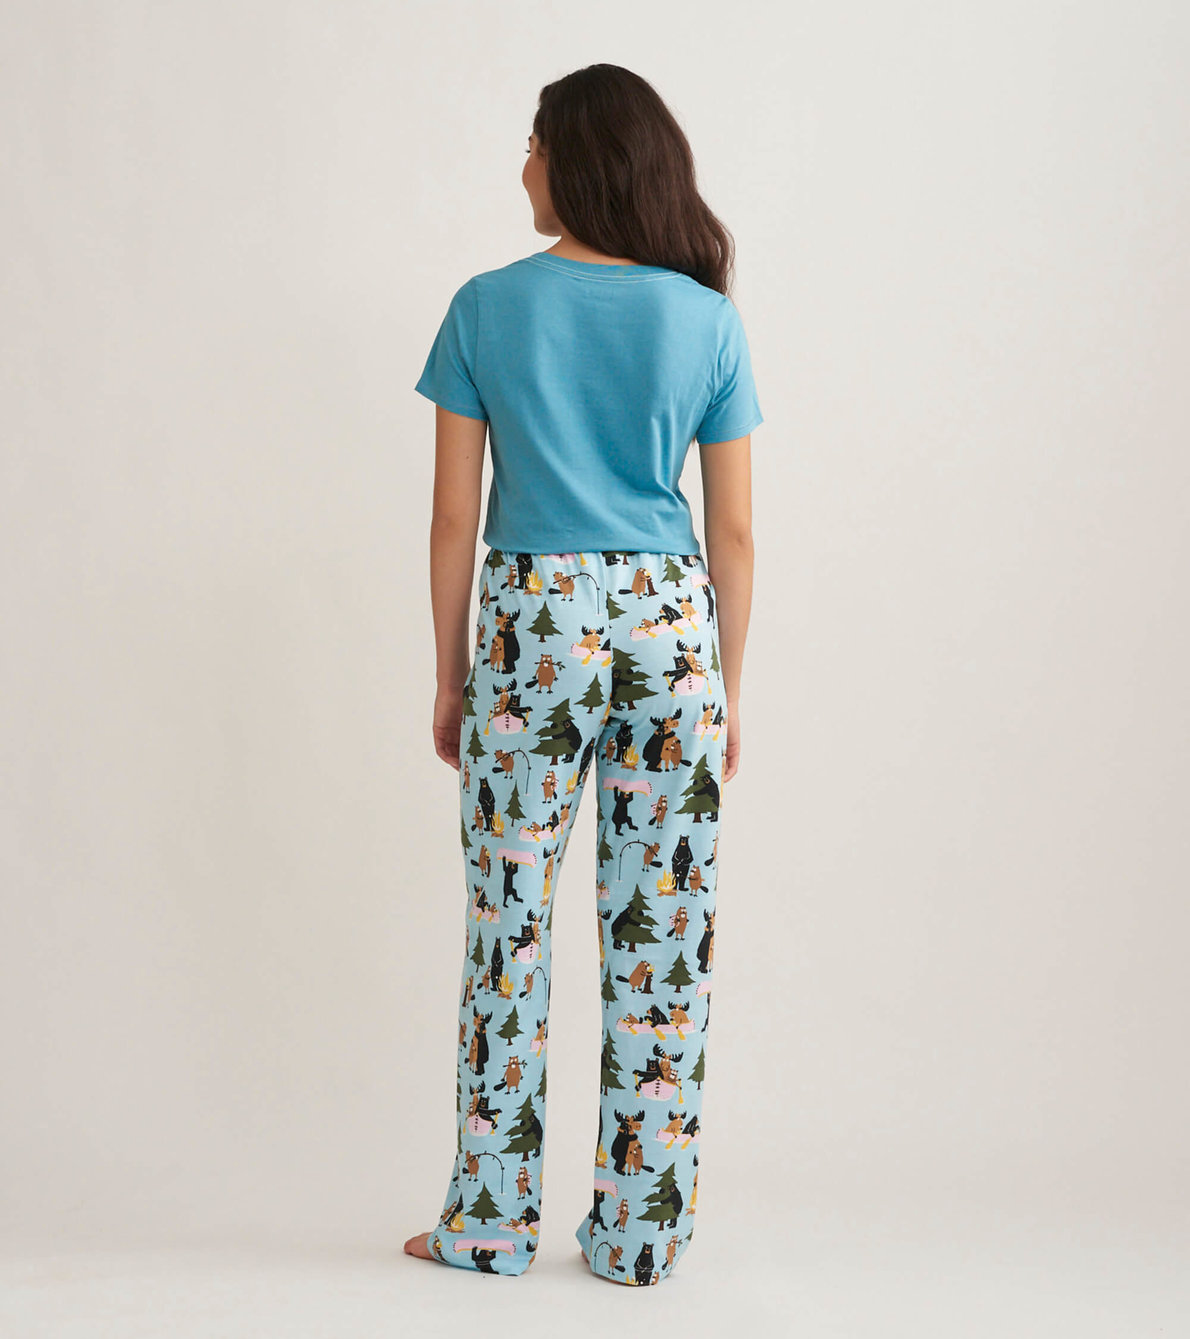 View larger image of Life in the Wild Women's Jersey Pajama Pants